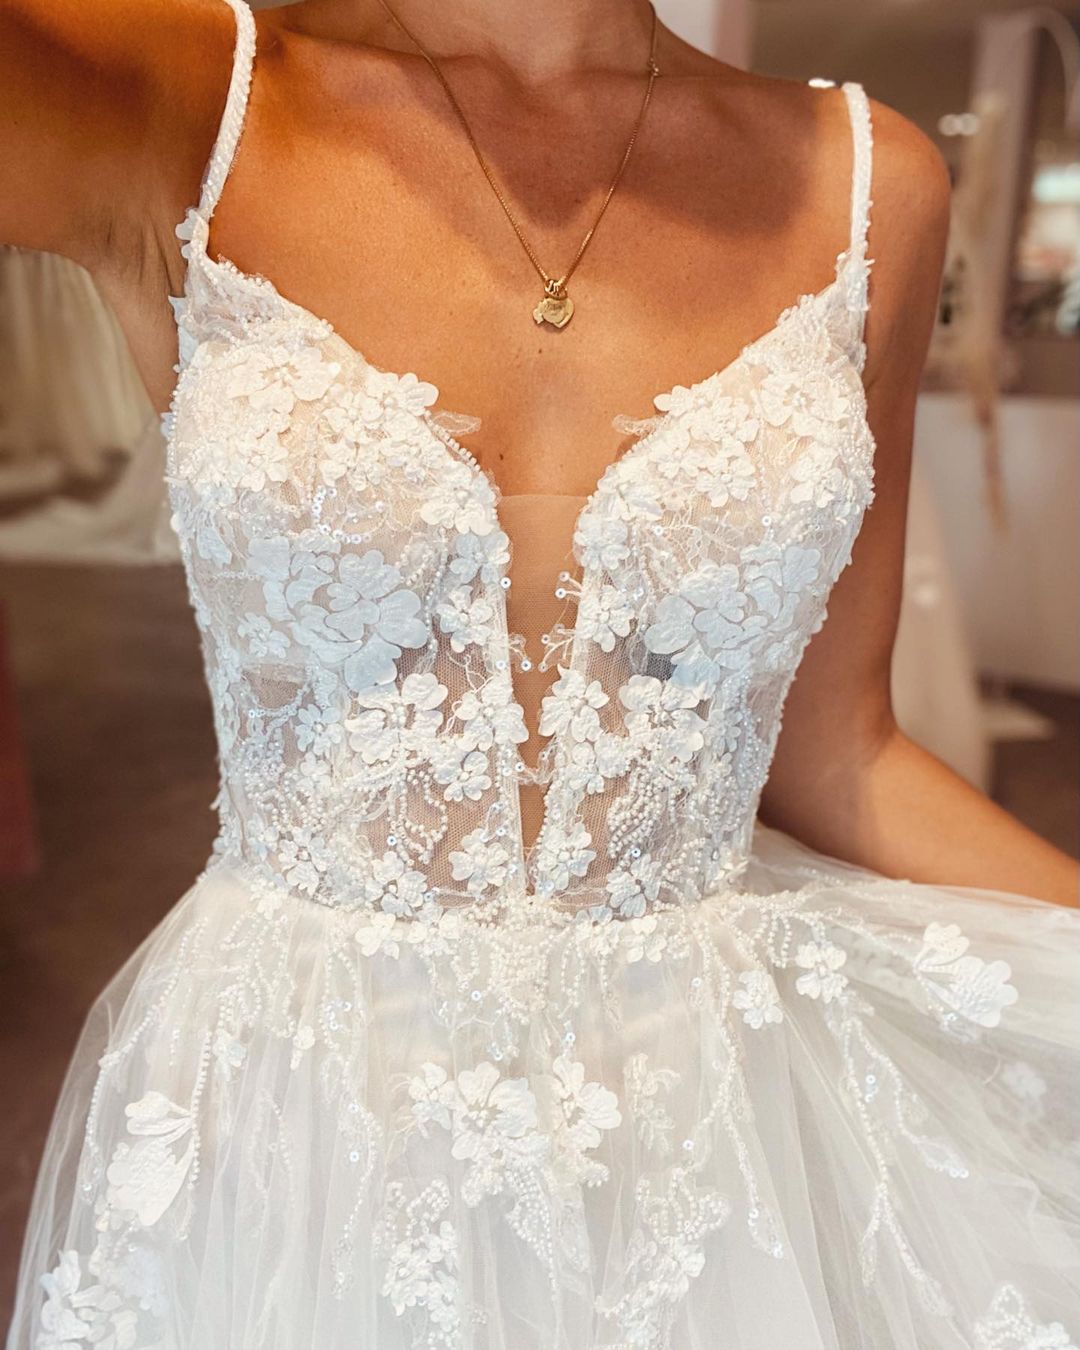 Long A-line Deep V-neck Spaghetti-Straps Backless Wedding Dress with Lace Tulle-Wedding Dresses-BallBride